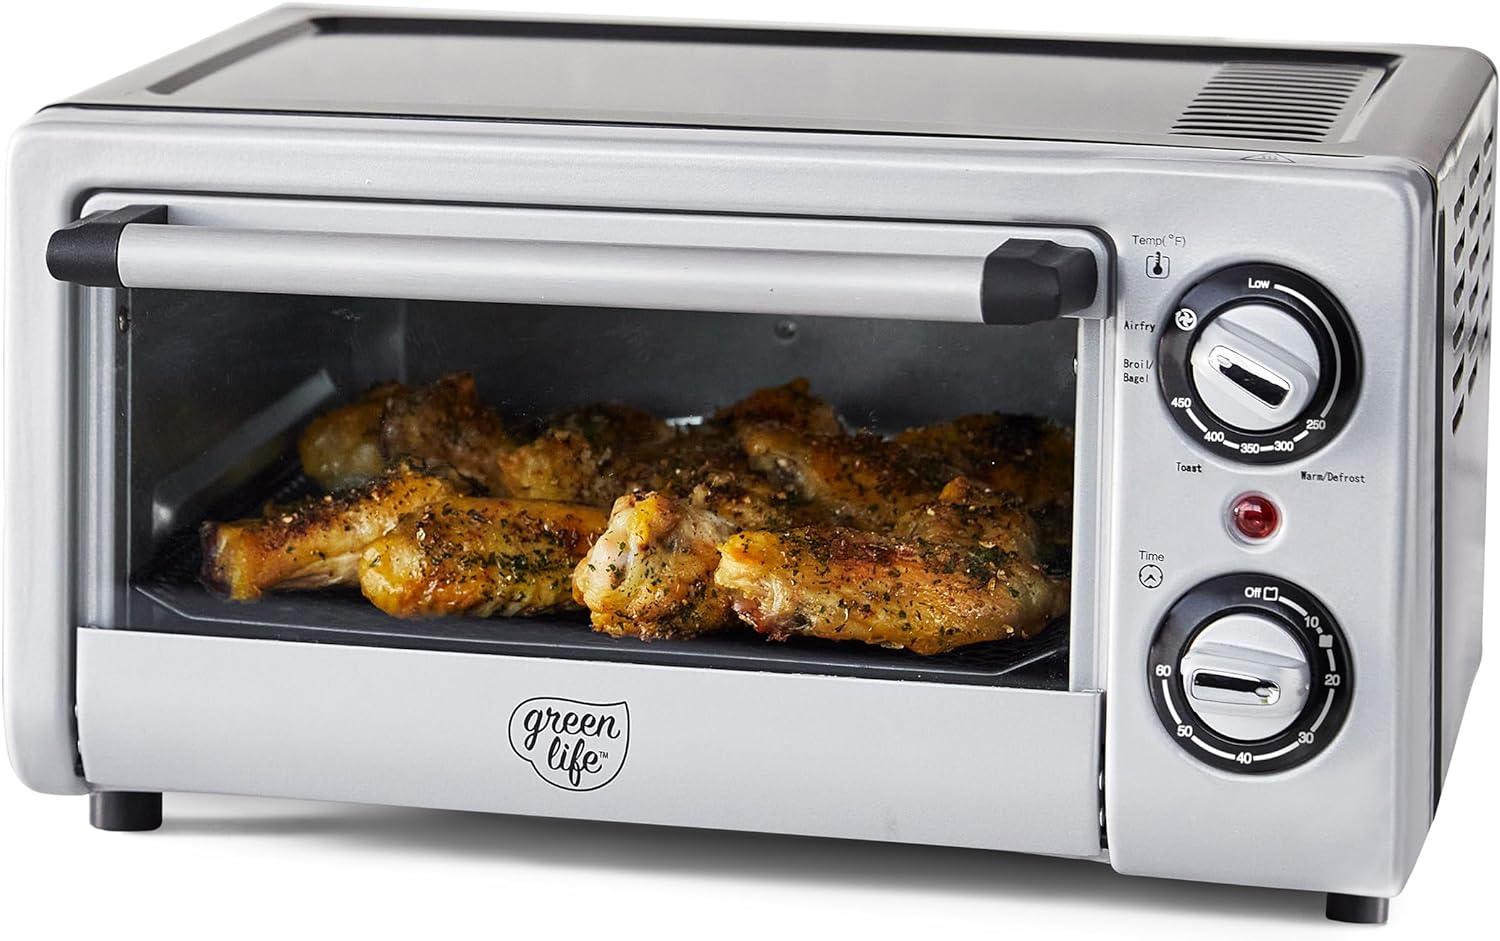 GreenLife Countertop Stainless Steel Toaster Oven Air Fryer